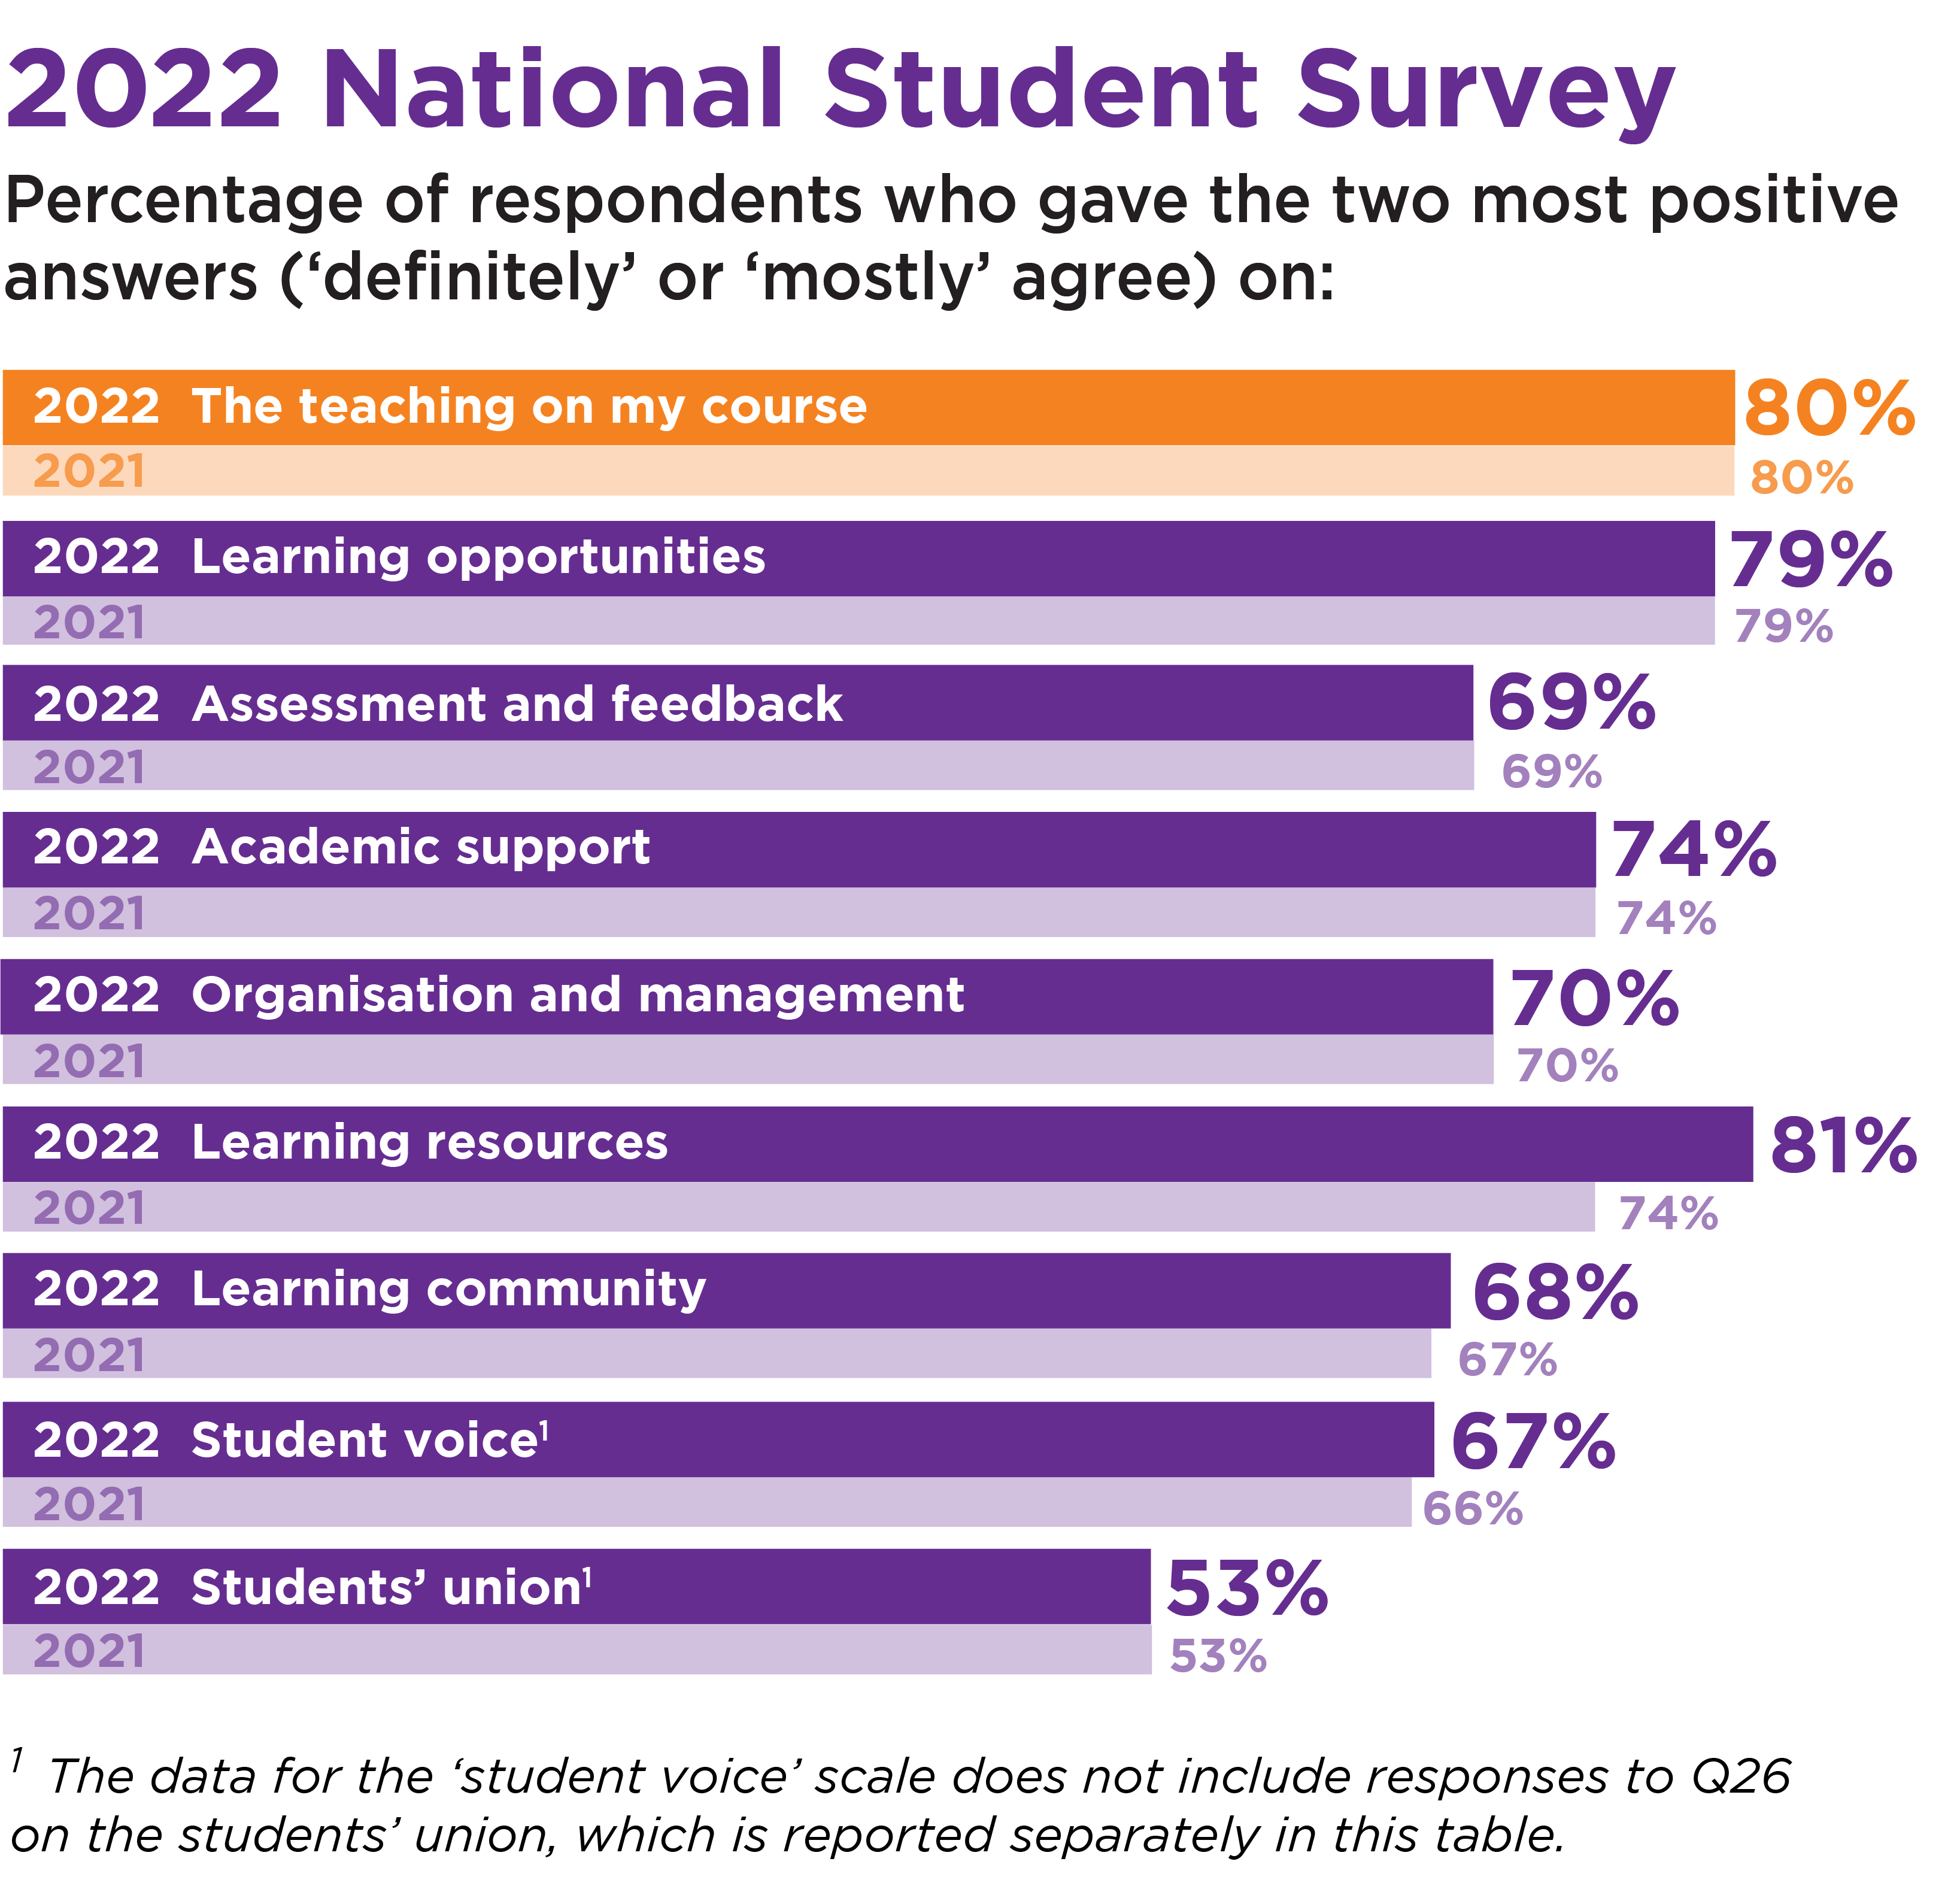 NSS 2022 percentages of positive answers within categories